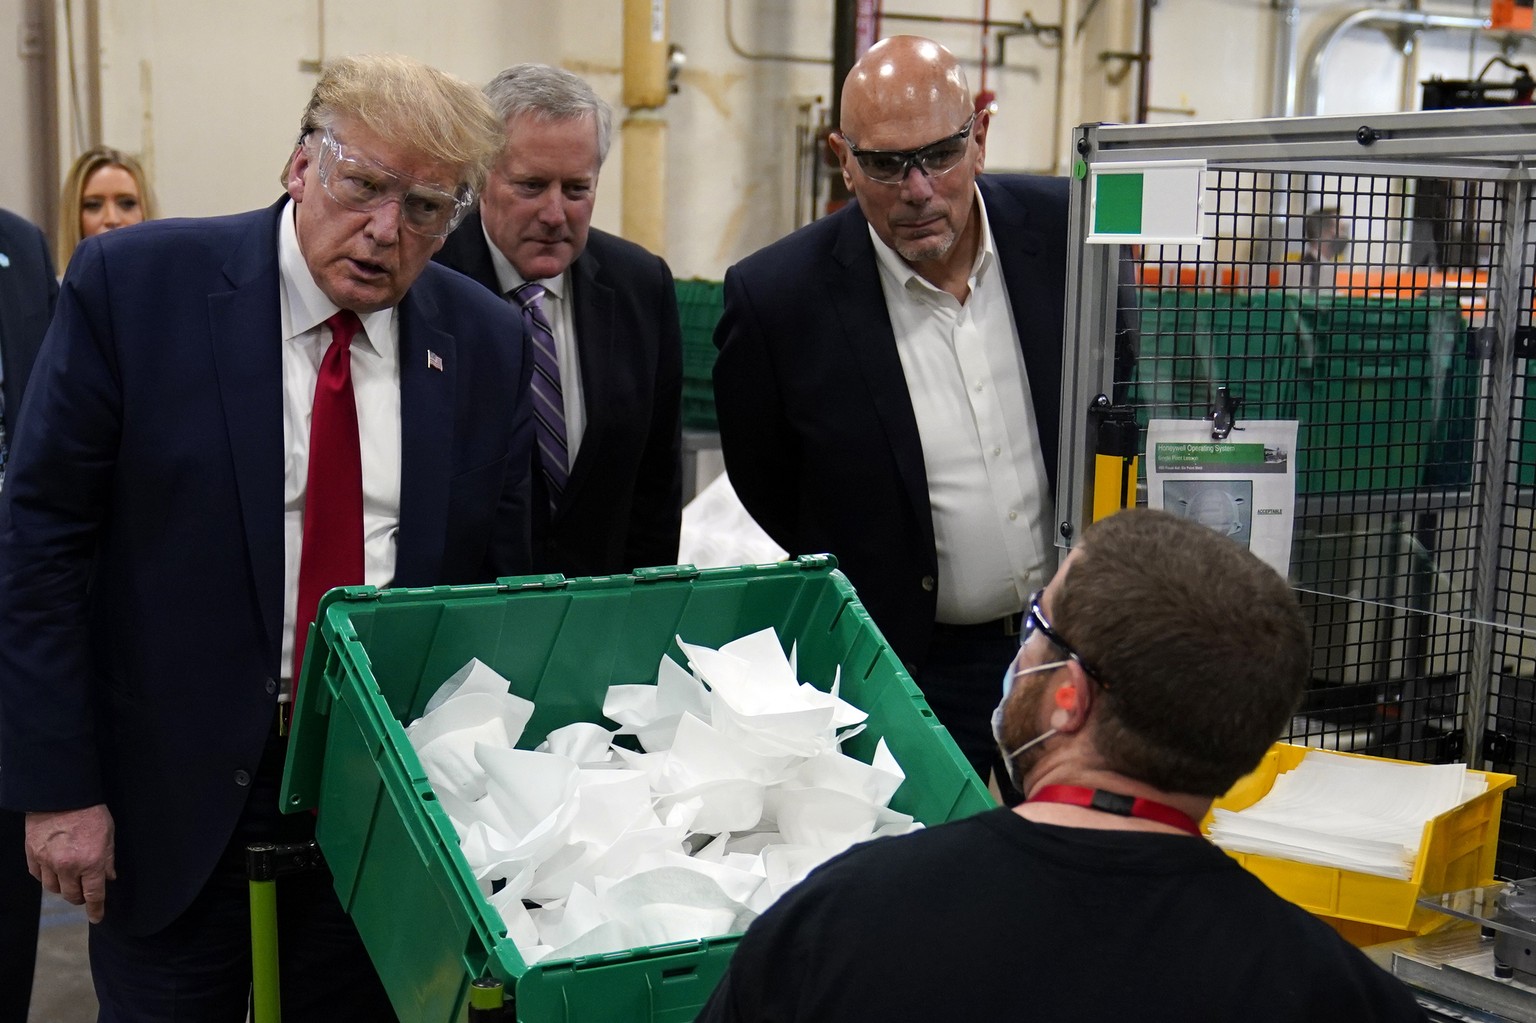 President Donald Trump participates in a tour of a Honeywell International plant that manufactures personal protective equipment, Tuesday, May 5, 2020, in Phoenix. (AP Photo/Evan Vucci)
Donald Trump